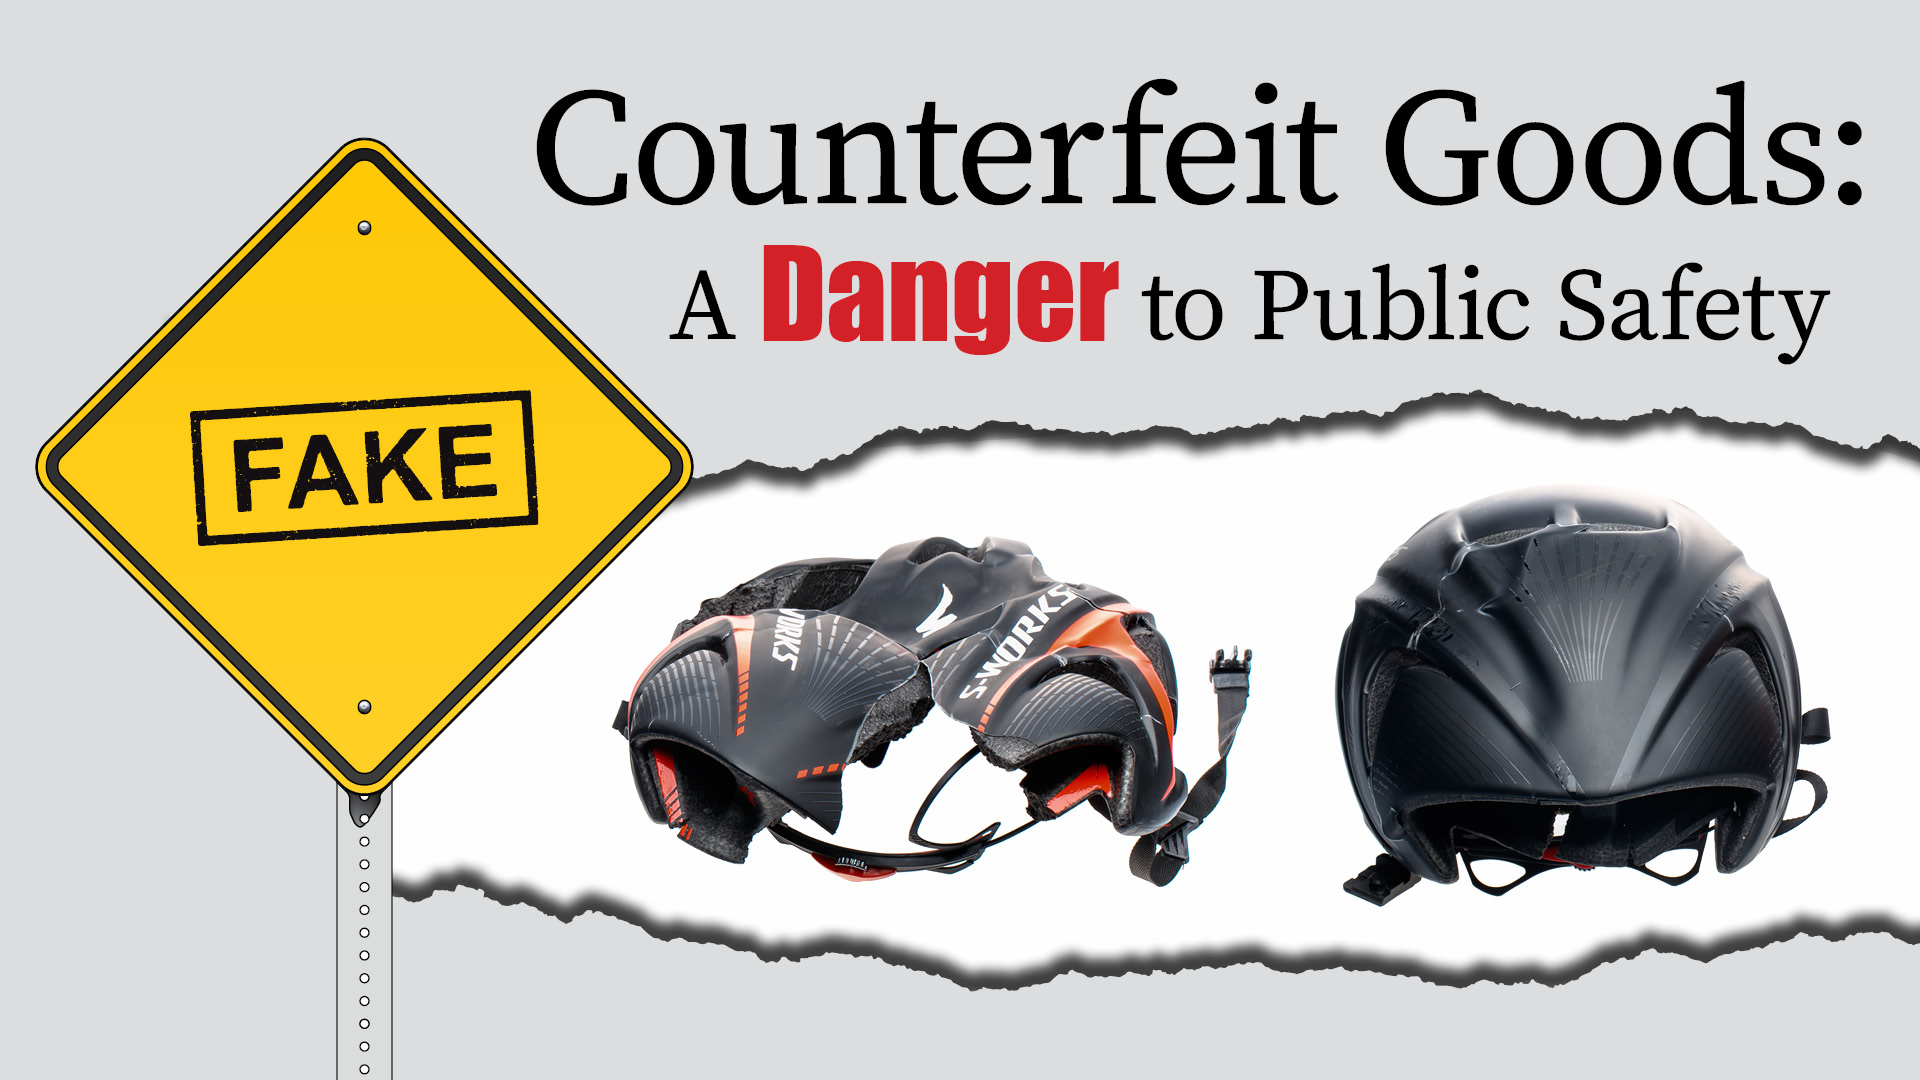 Counterfeit Goods: A Danger to Public Safety